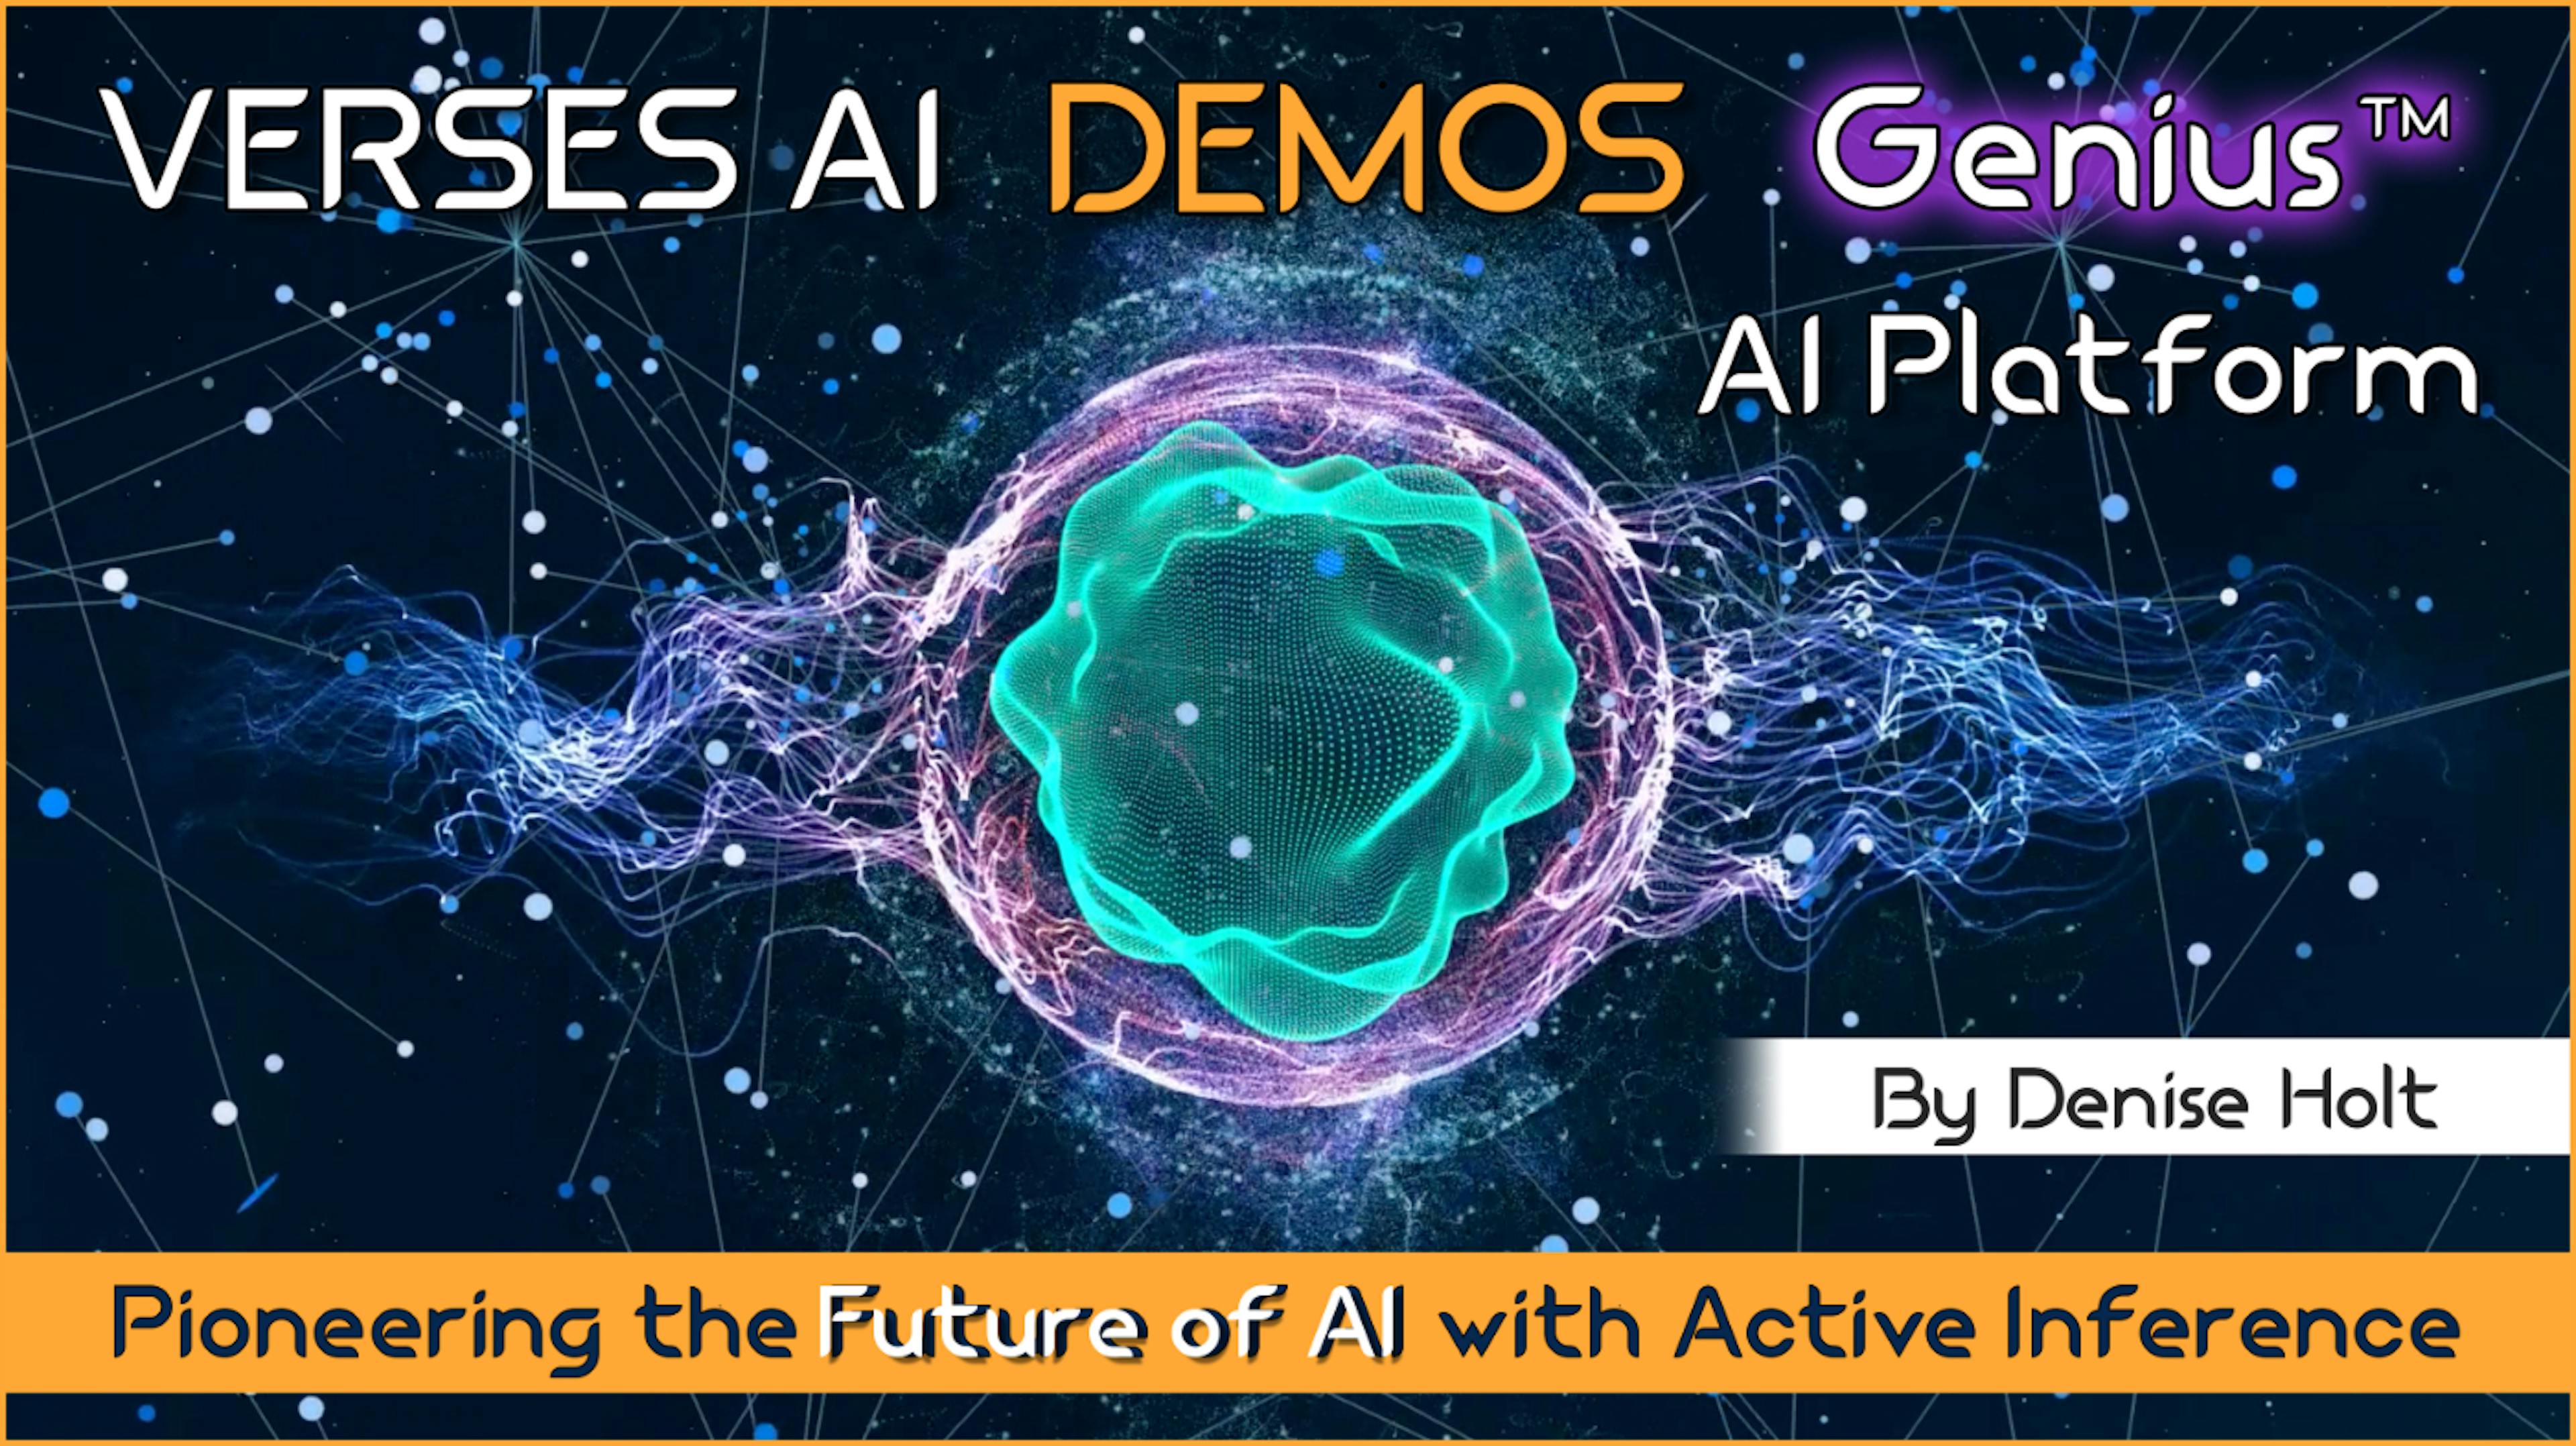 /verses-ai-demos-geniustm-pioneering-the-path-to-smarter-ai feature image